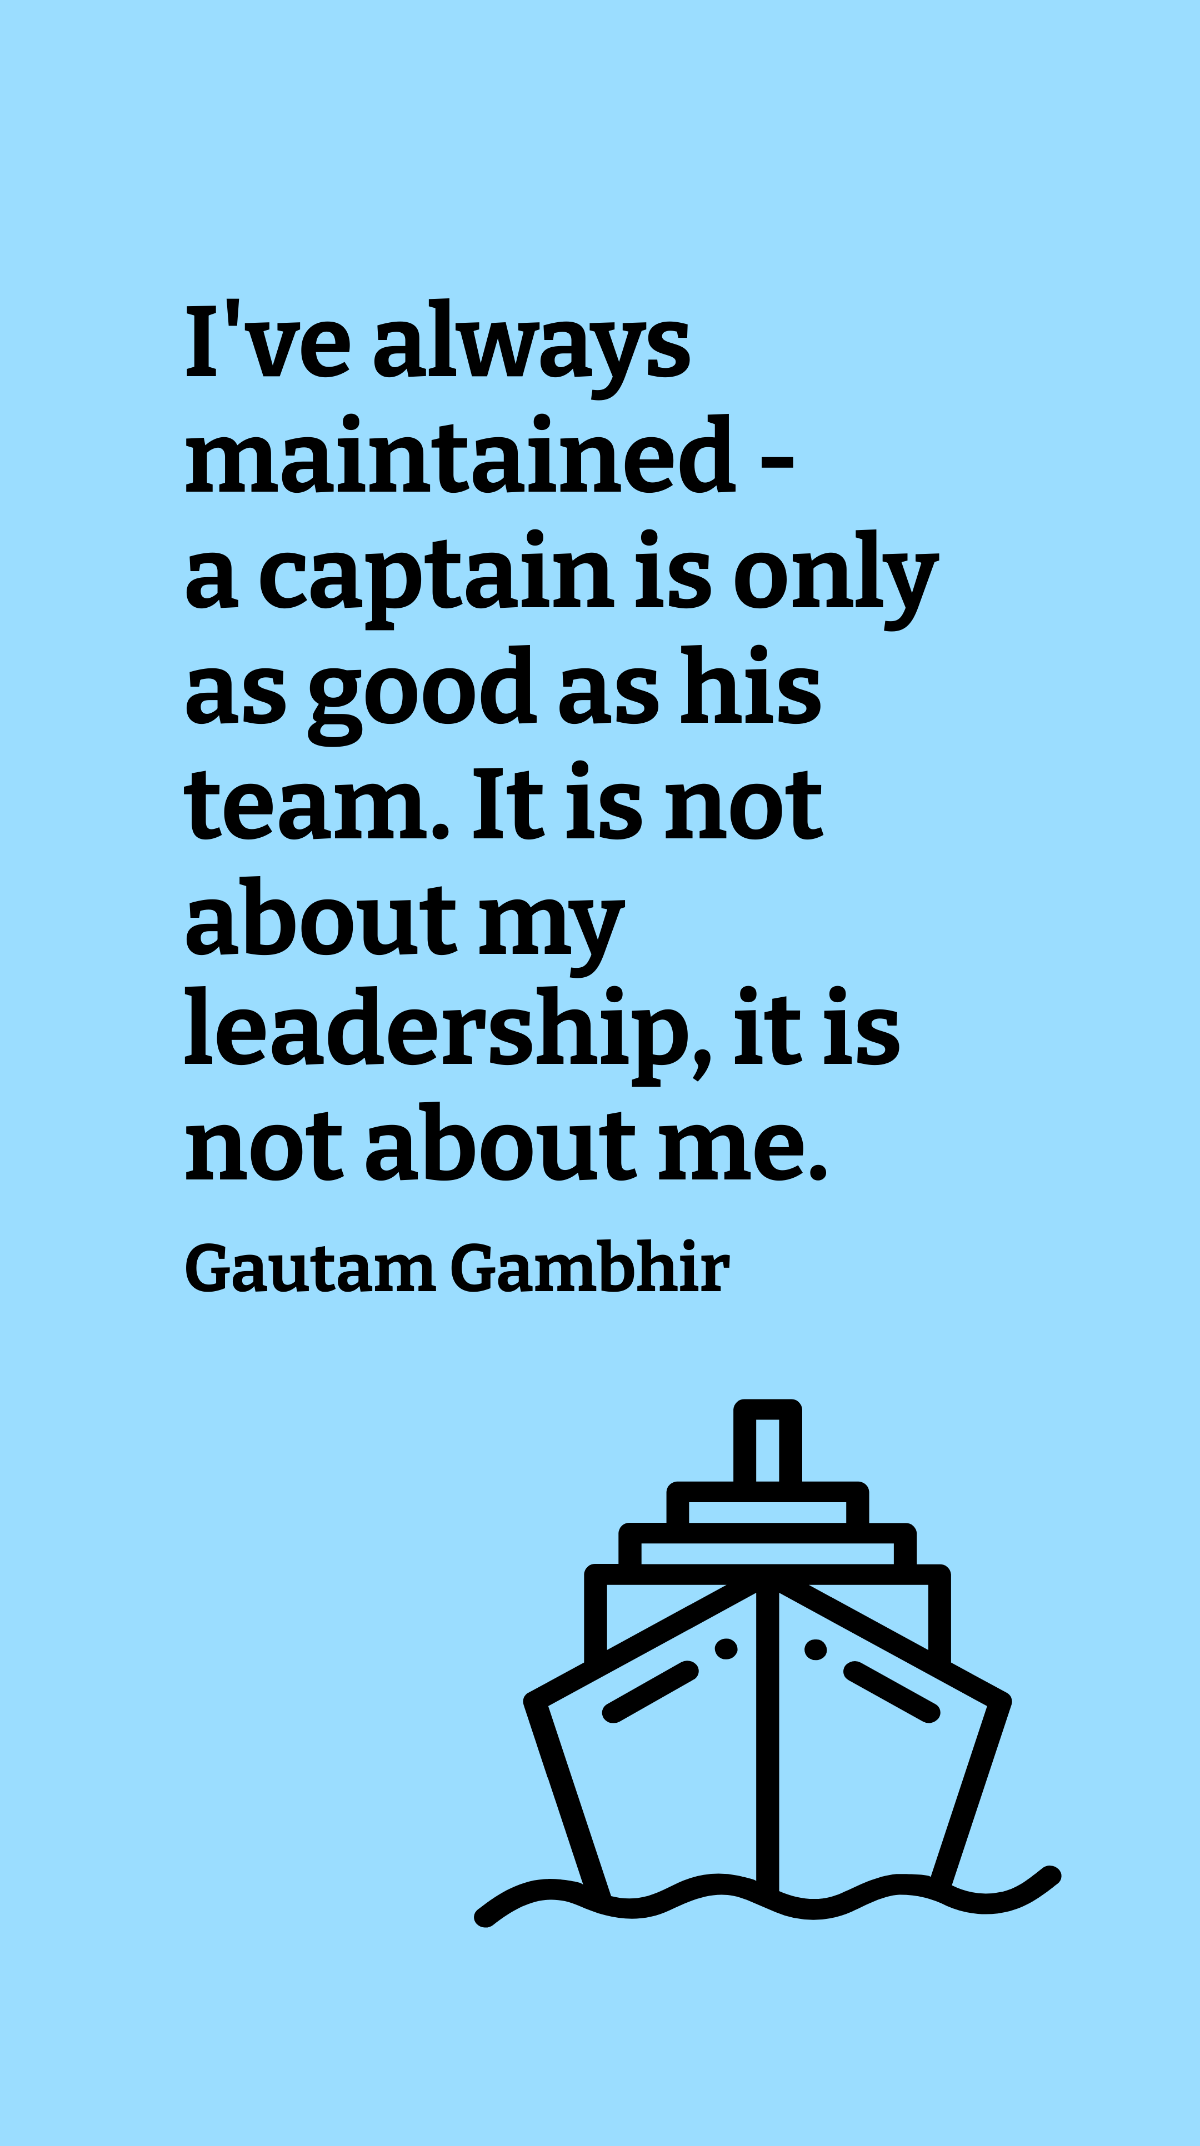 Gautam Gambhir - I've always maintained - a captain is only as good as his team. It is not about my leadership, it is not about me. Template